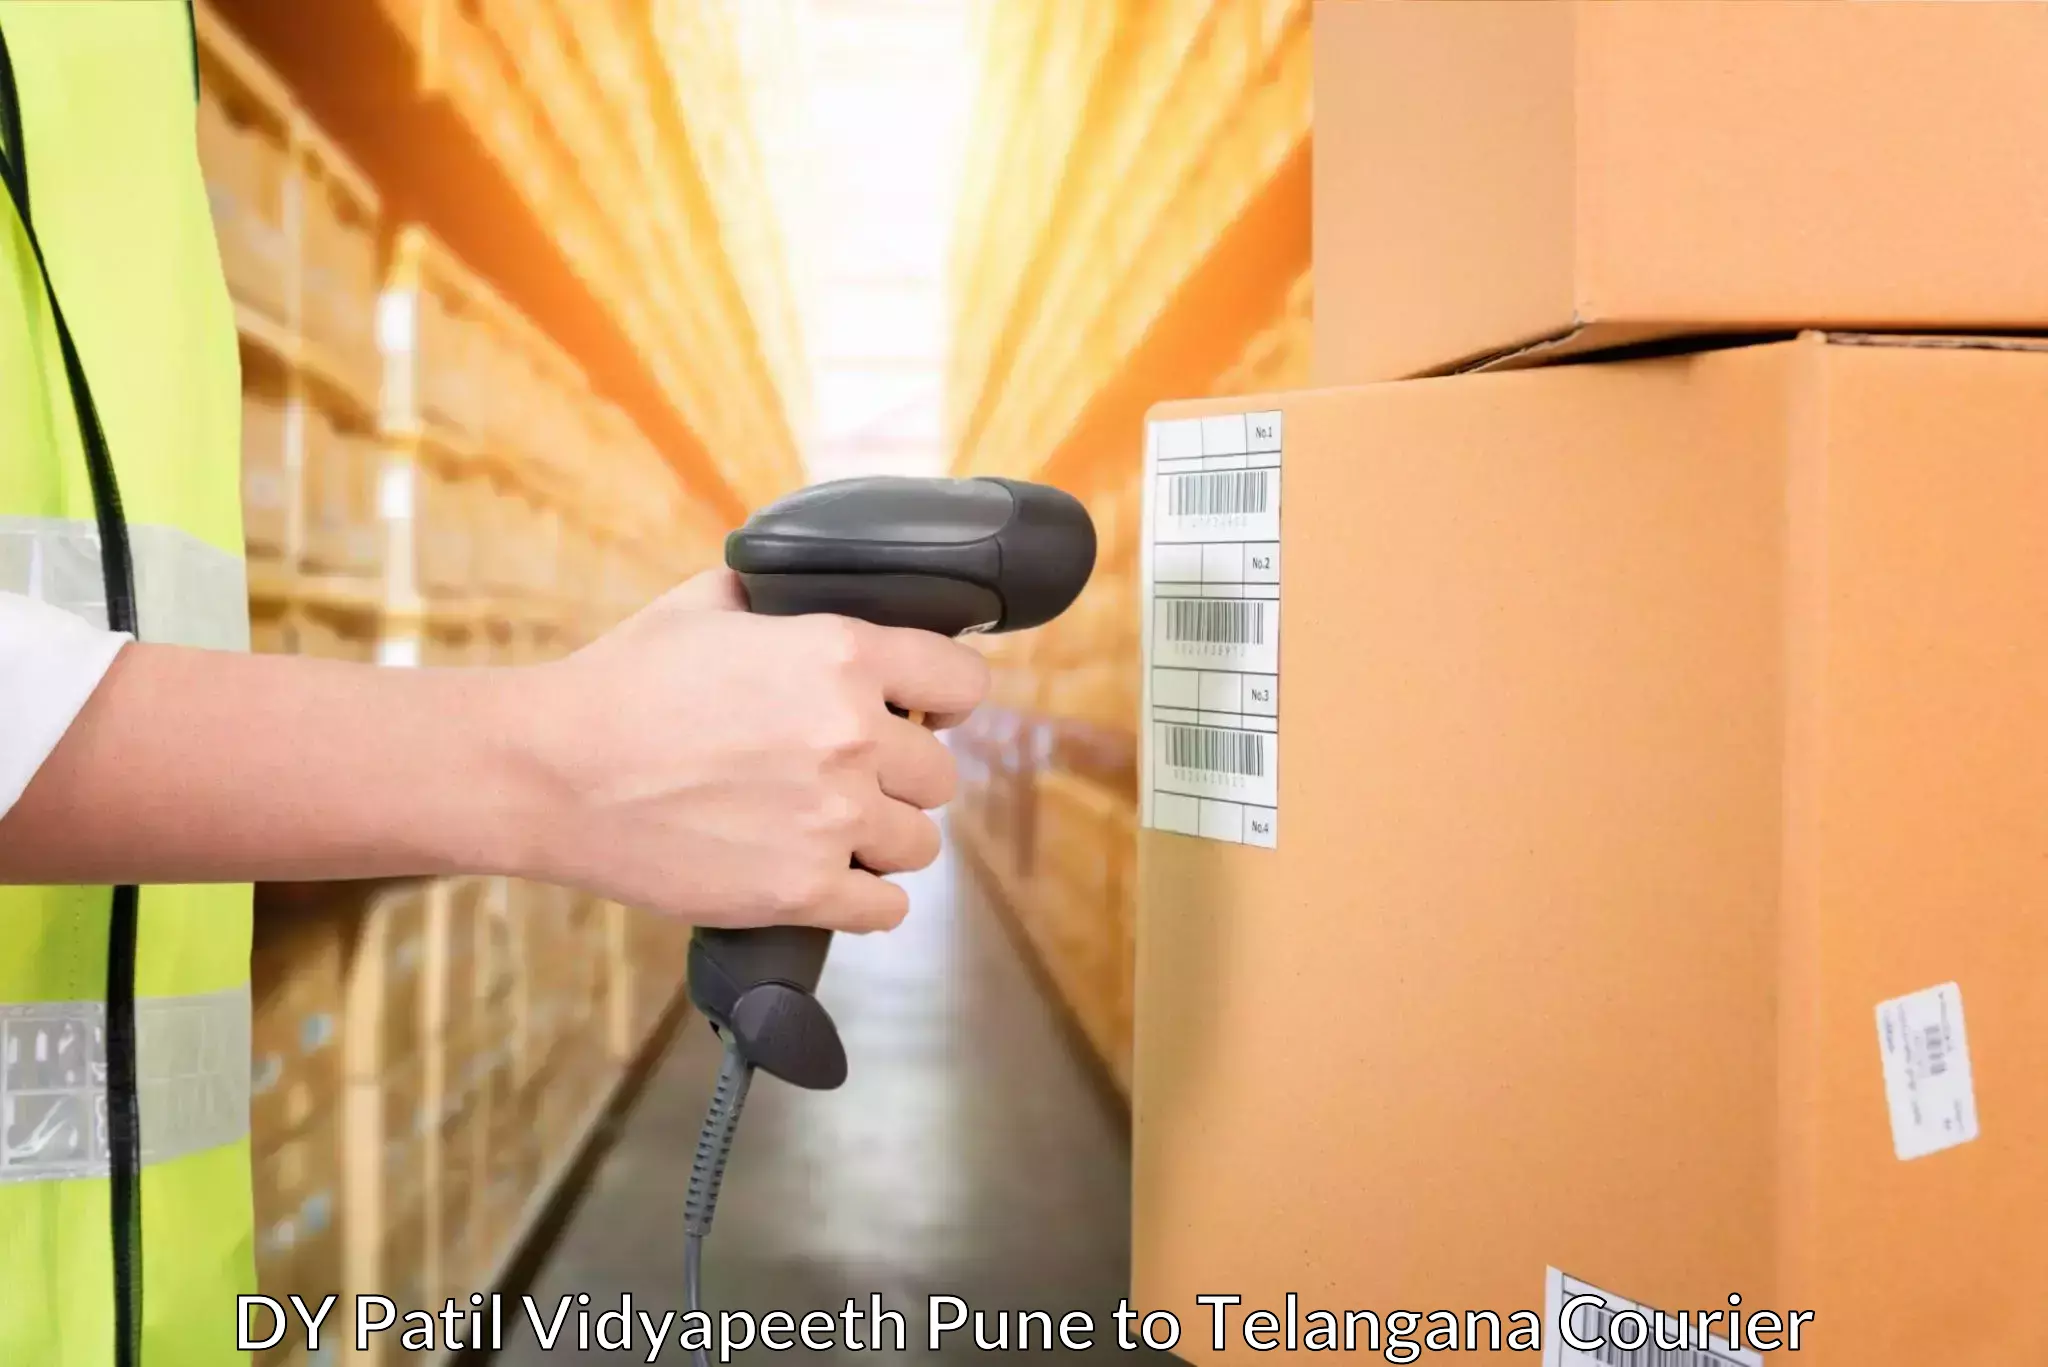 Reliable delivery network DY Patil Vidyapeeth Pune to Moinabad